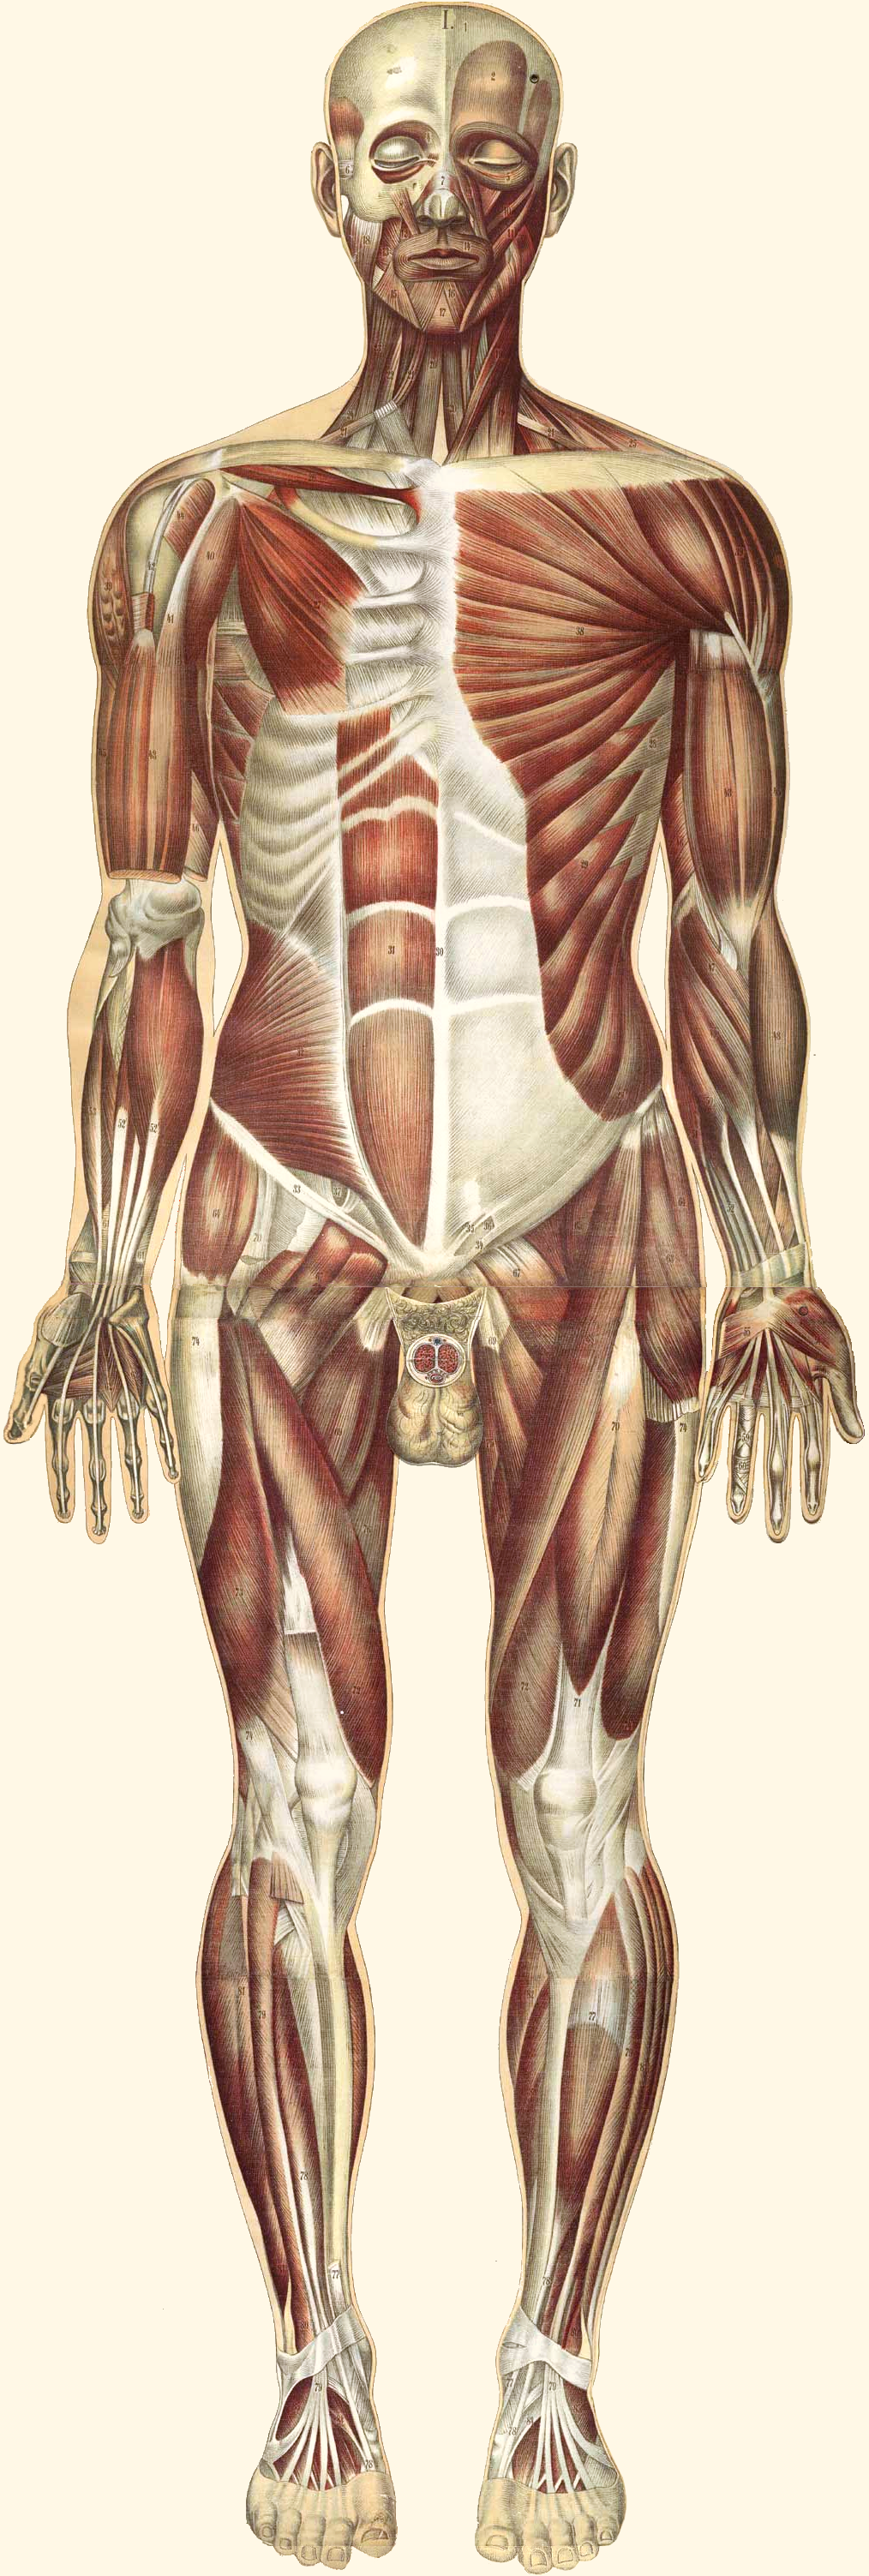 11.2.2 Muscular System